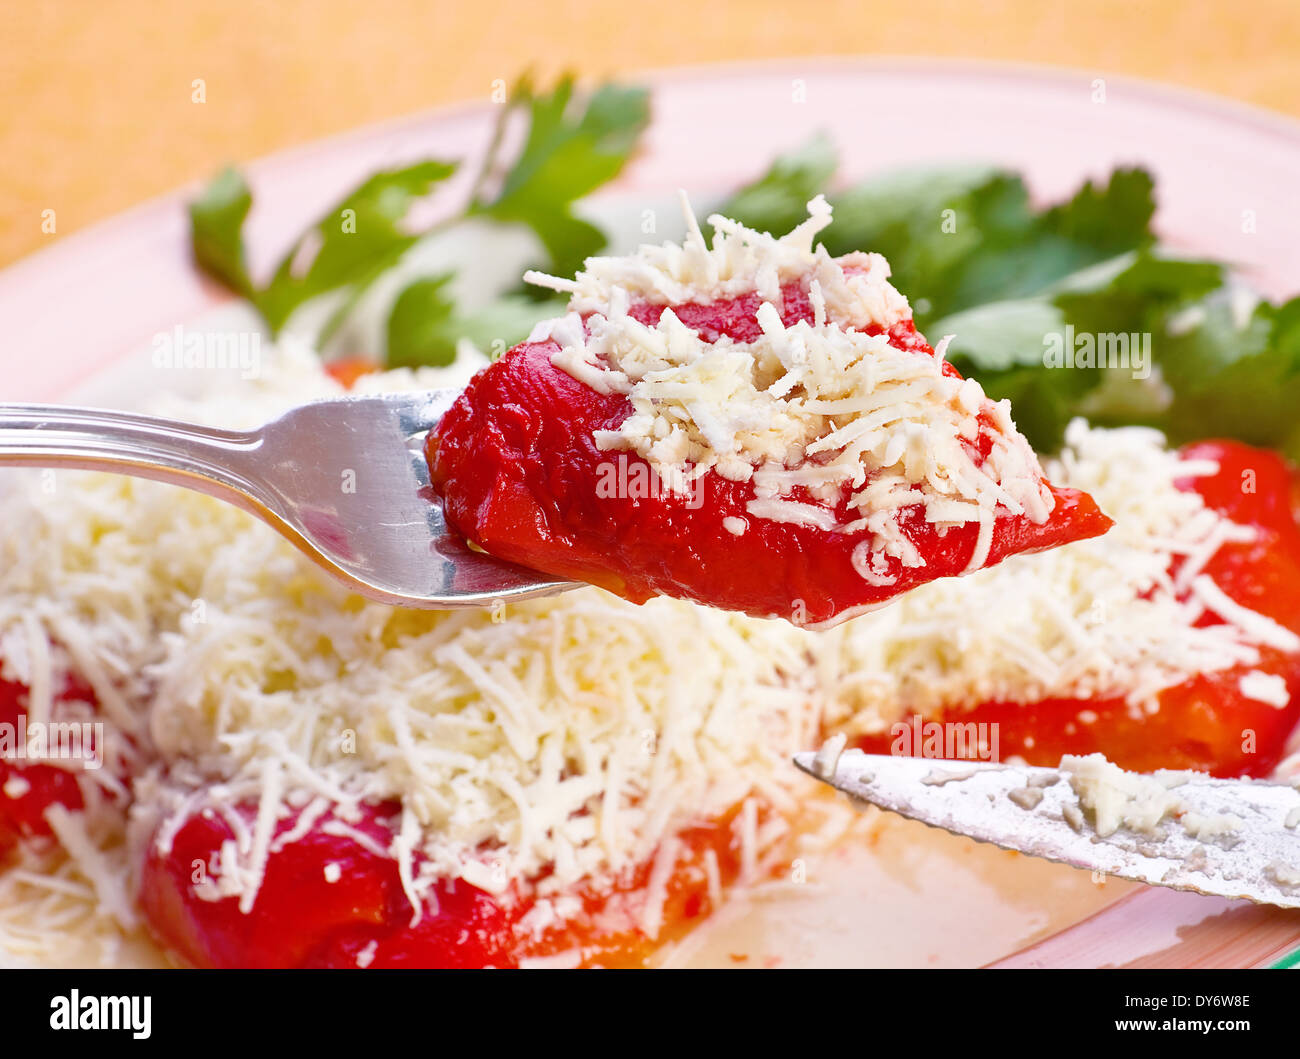 Baked red pepper vegetable with white cheese Stock Photo